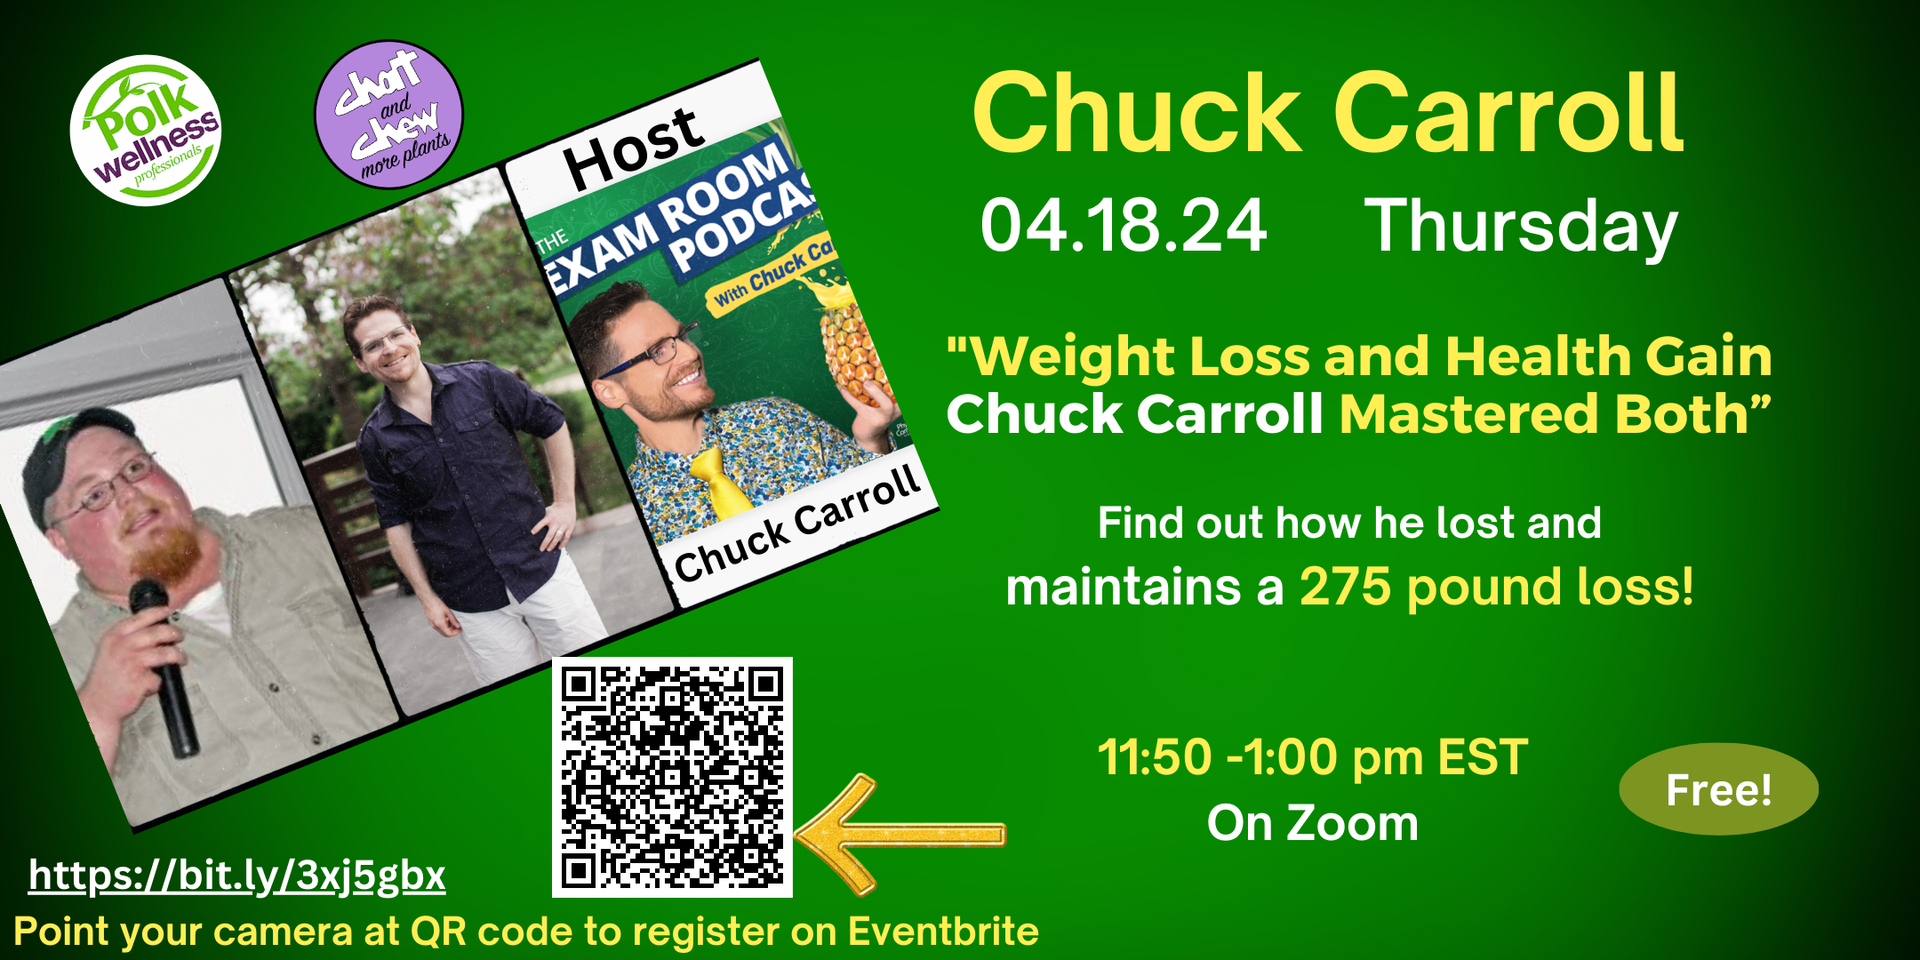 A poster for chuck carroll 's weight loss and health gain